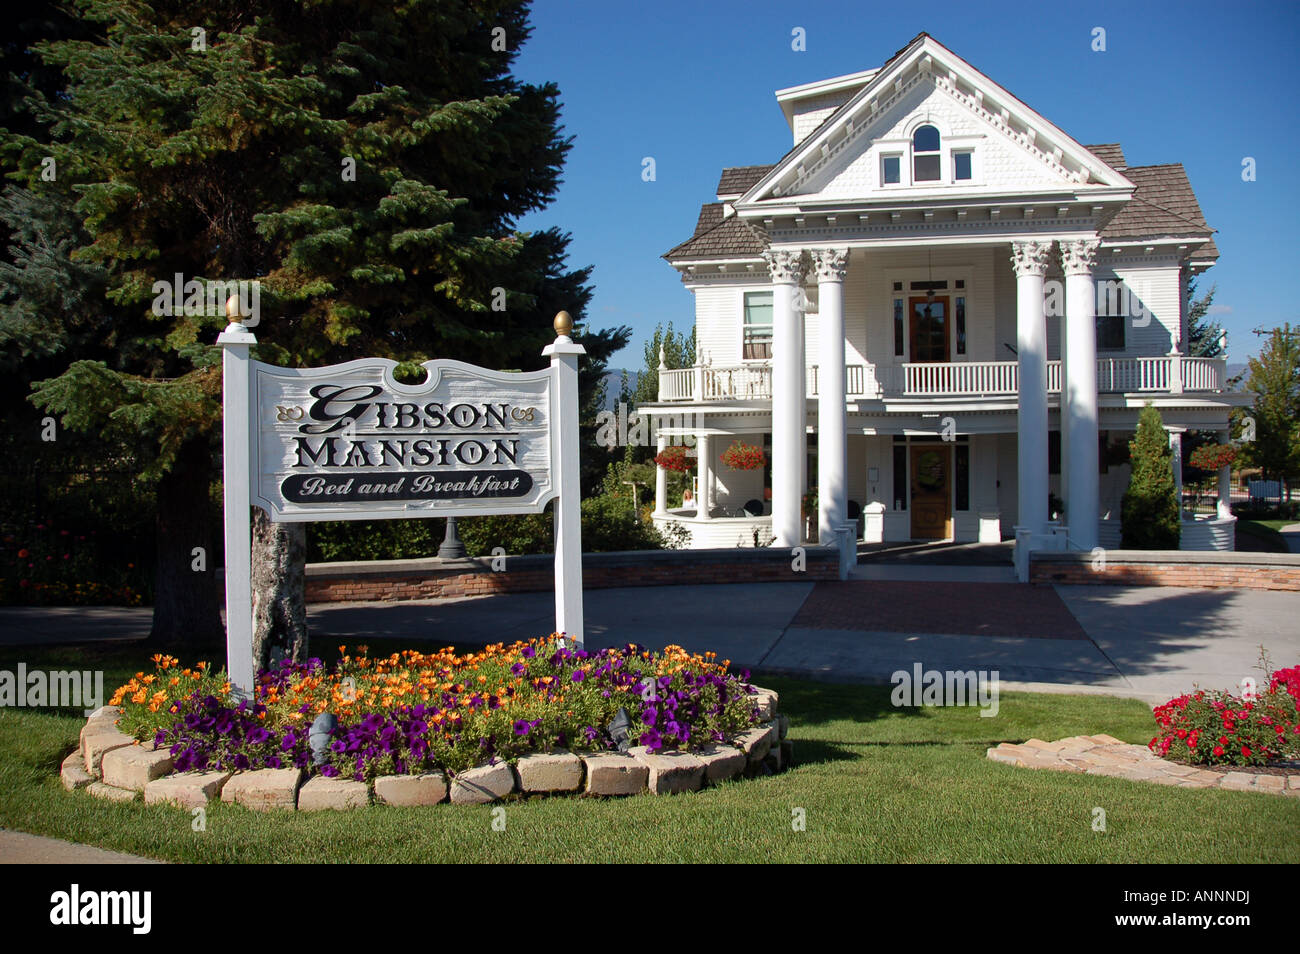 The Gibson Mansion, a traditional bed and breakfast, Missoula, Montana